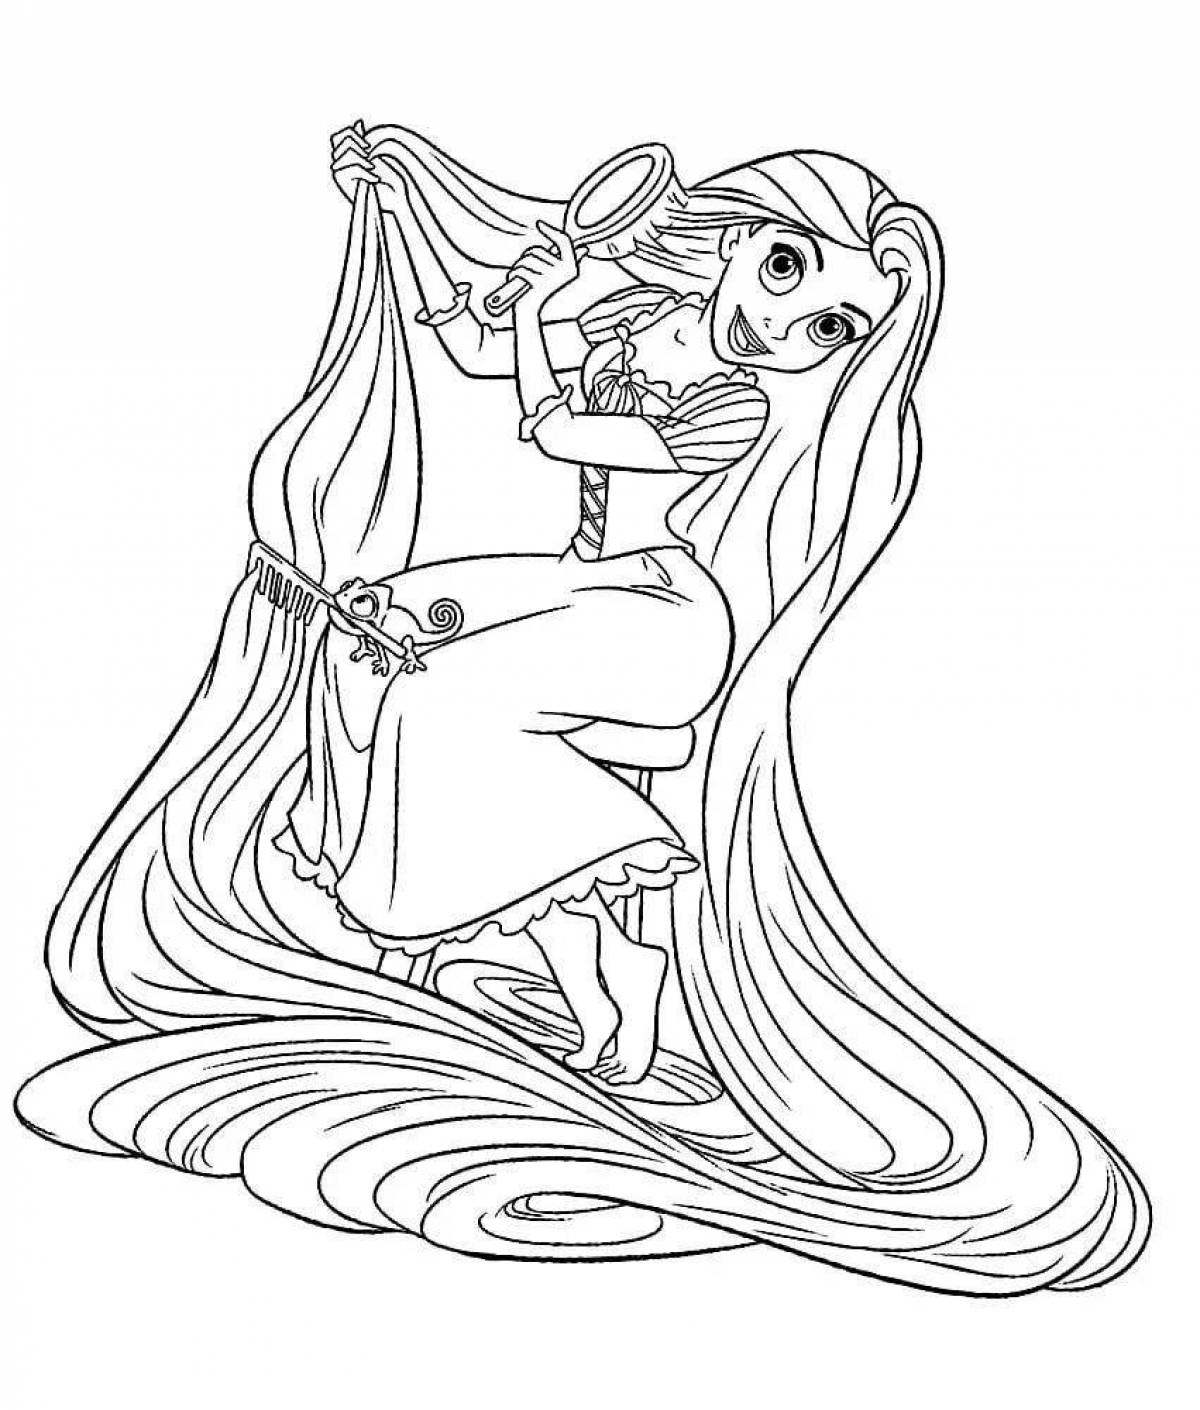 Divine princess with long hair coloring book